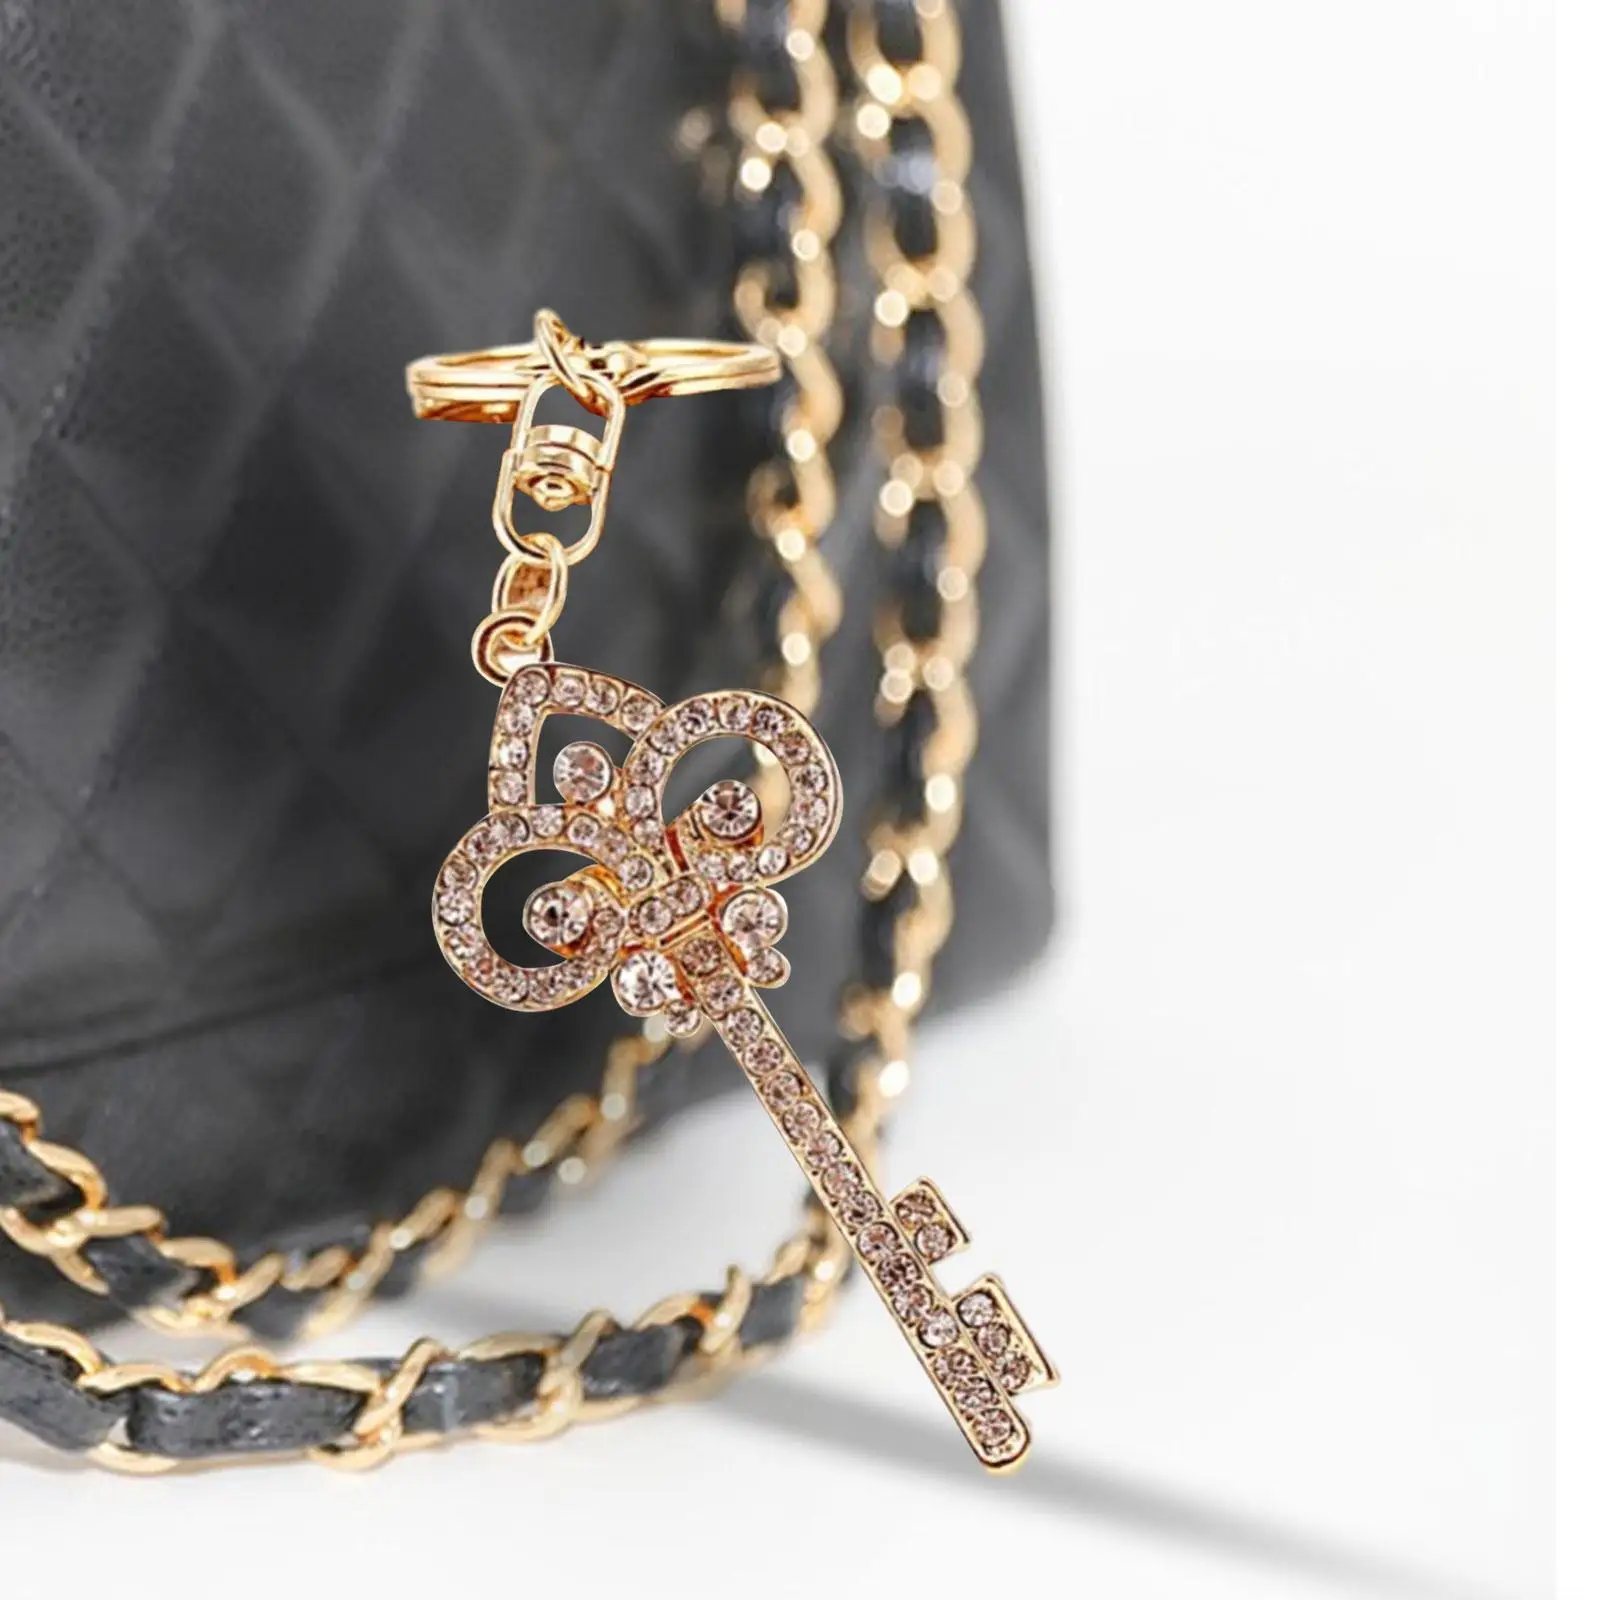 Key Rhinestone Keychain Gifts Accessories Decorative Creative Sparkling Glitter Keyring Bag Charm for Wallet Tote Backpack Girls